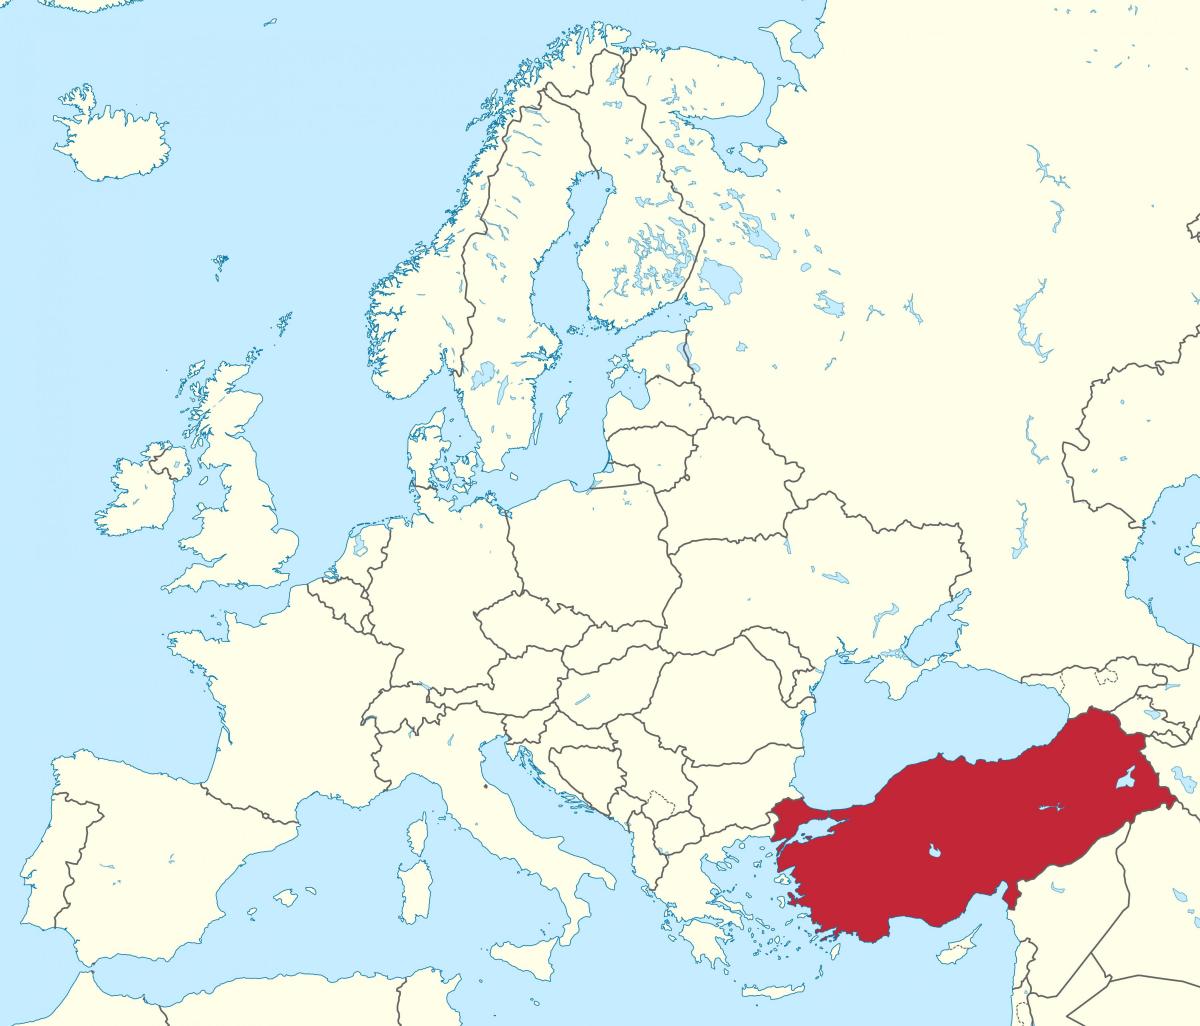 Turkey location on the Asia map